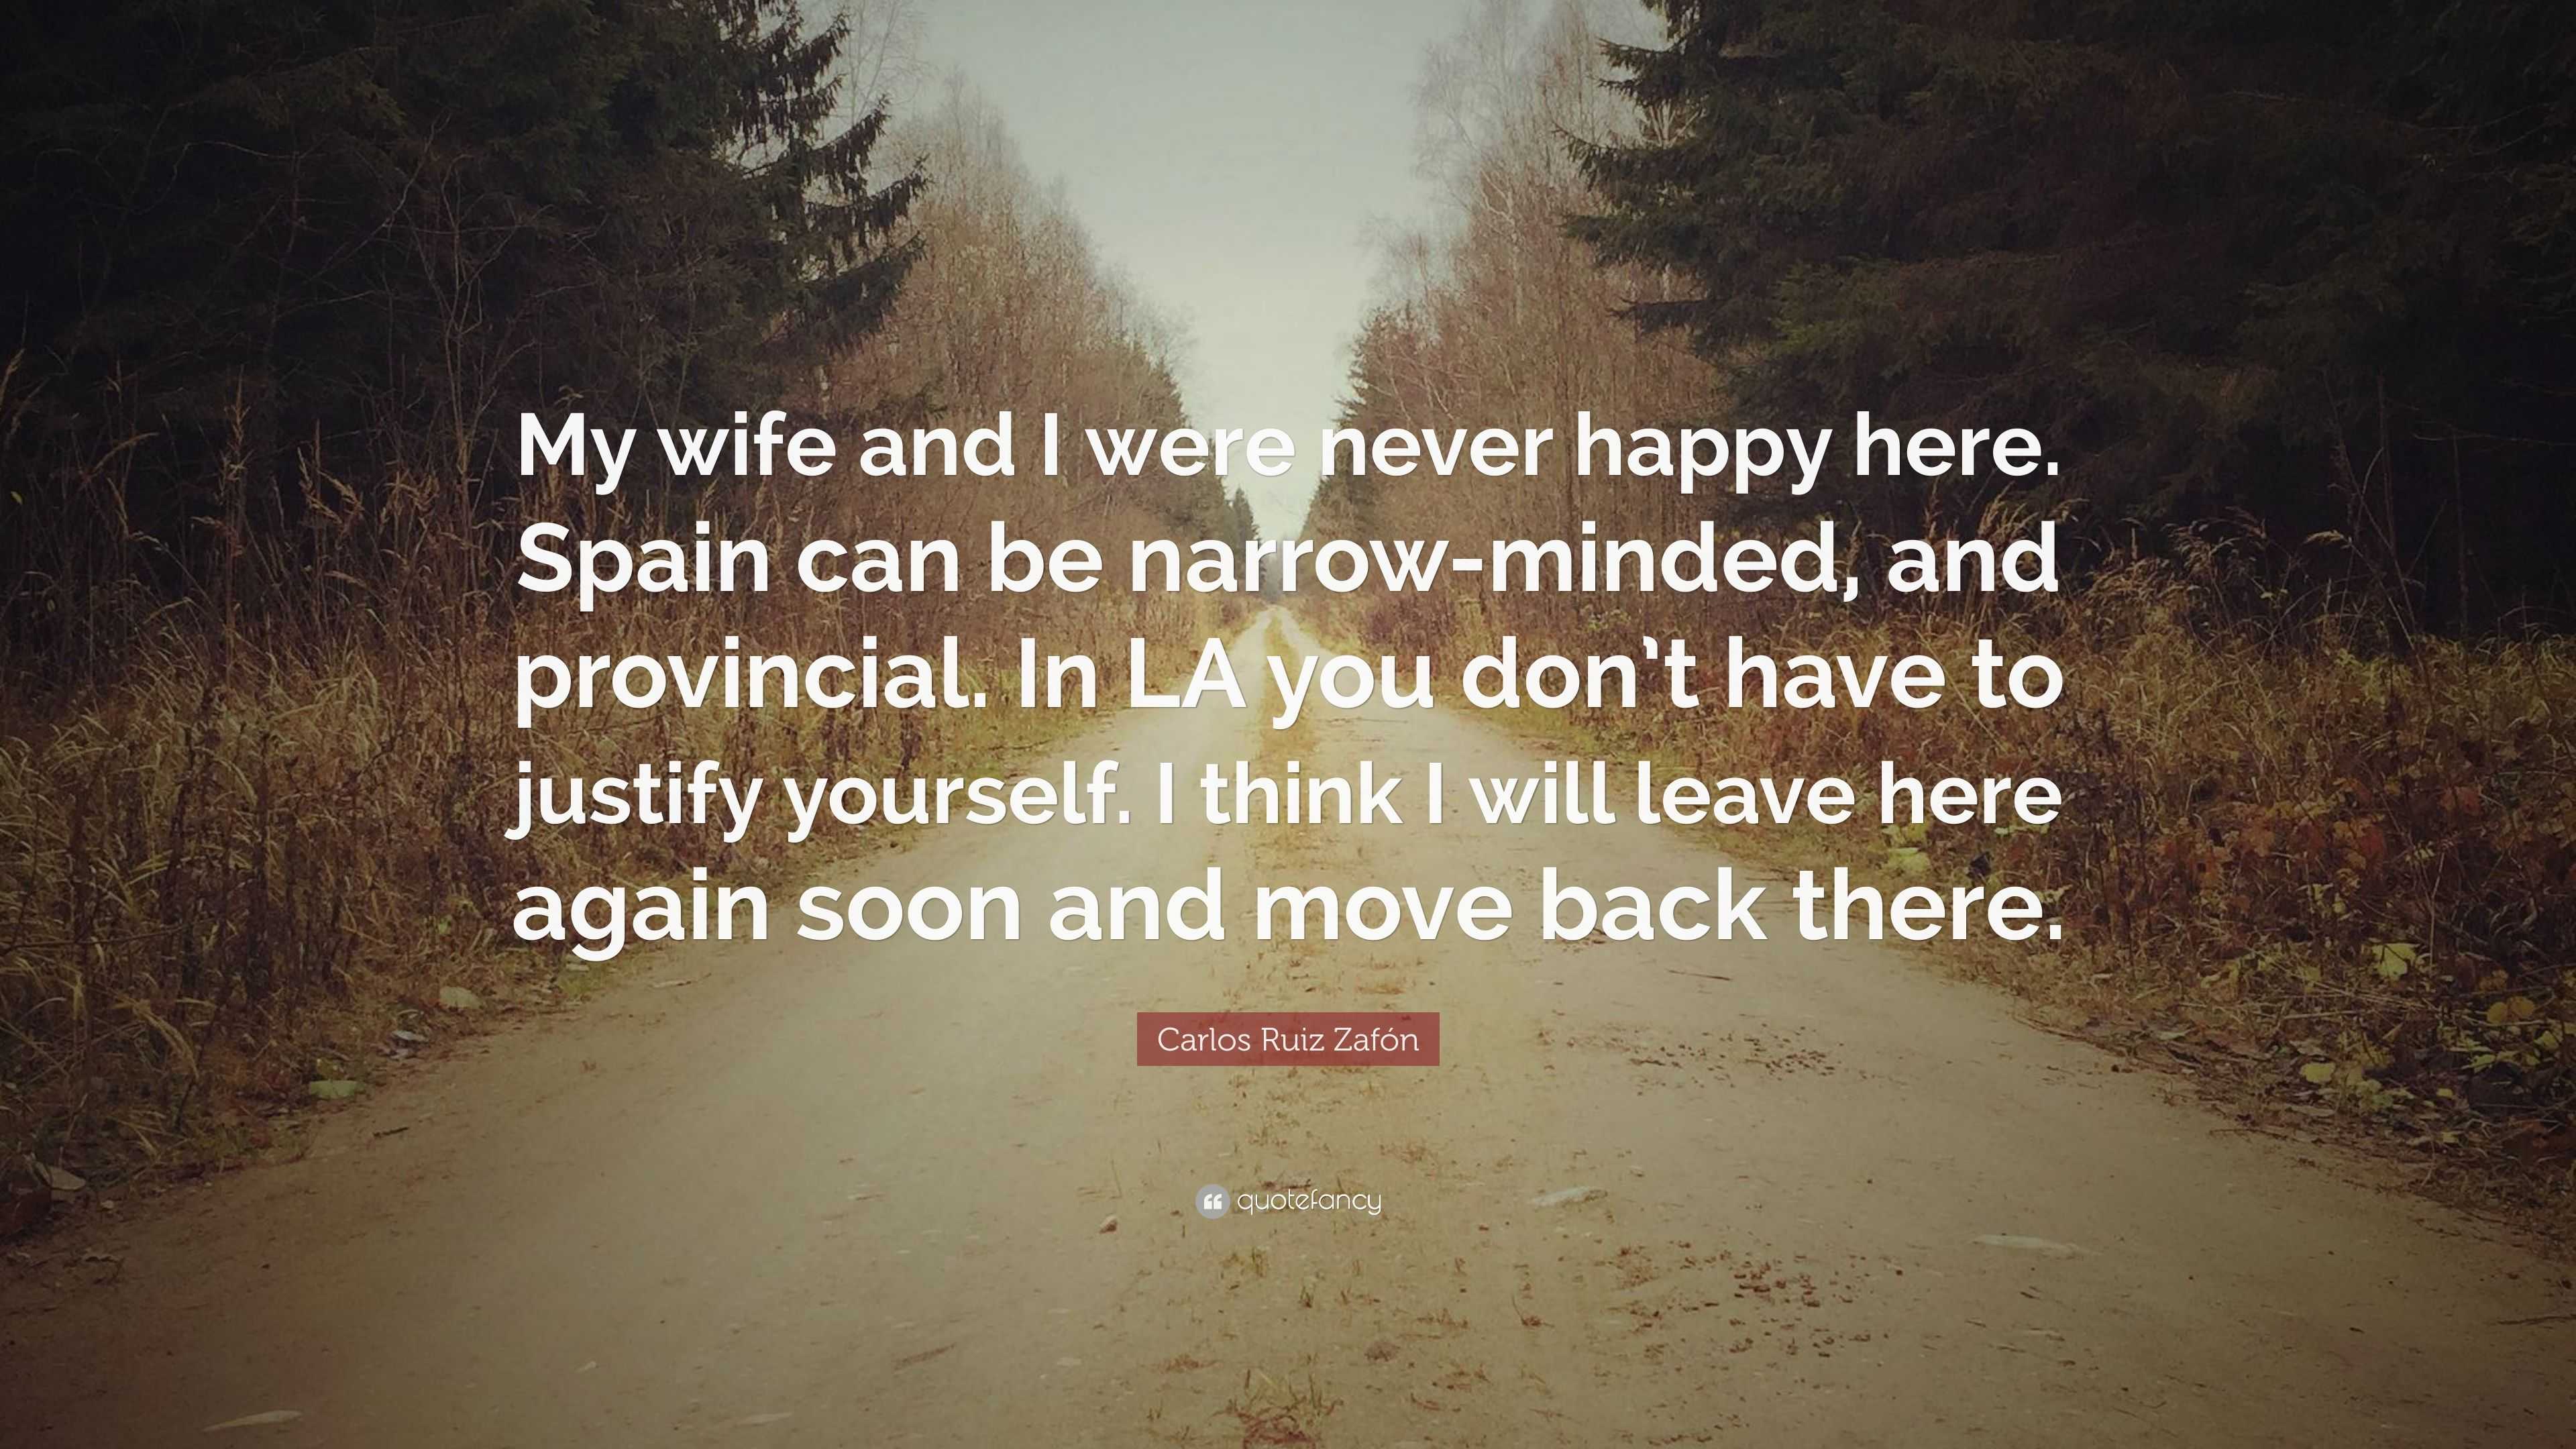 Carlos Ruiz Zafón Quote: “My wife and I were never happy here